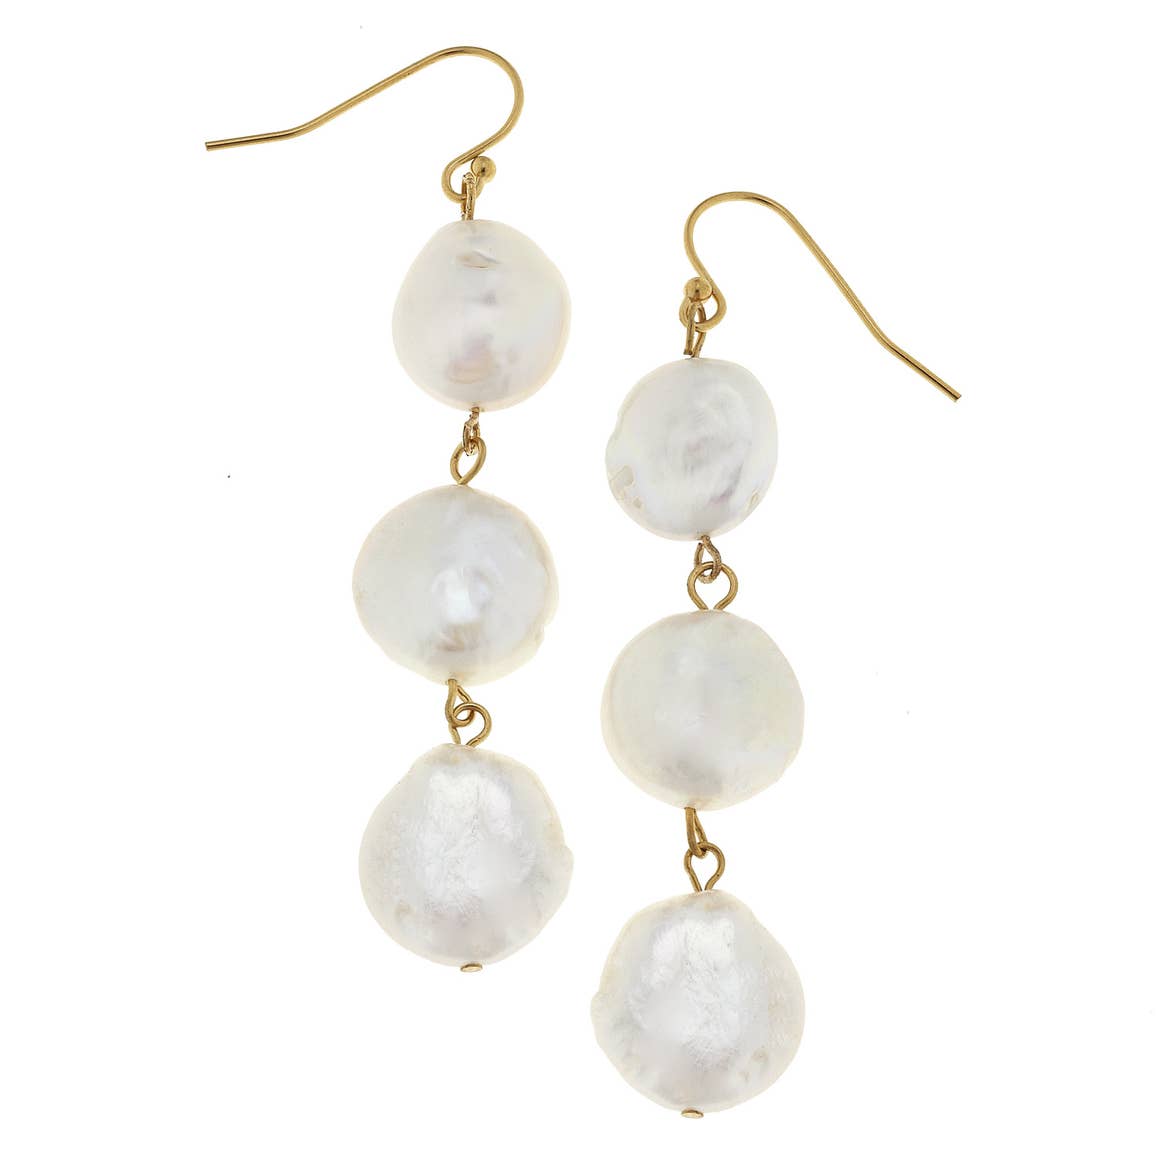 Triple Coin Pearl Earrings by Susan Shaw - Corinne an Affordable Women's Clothing Boutique in the US USA